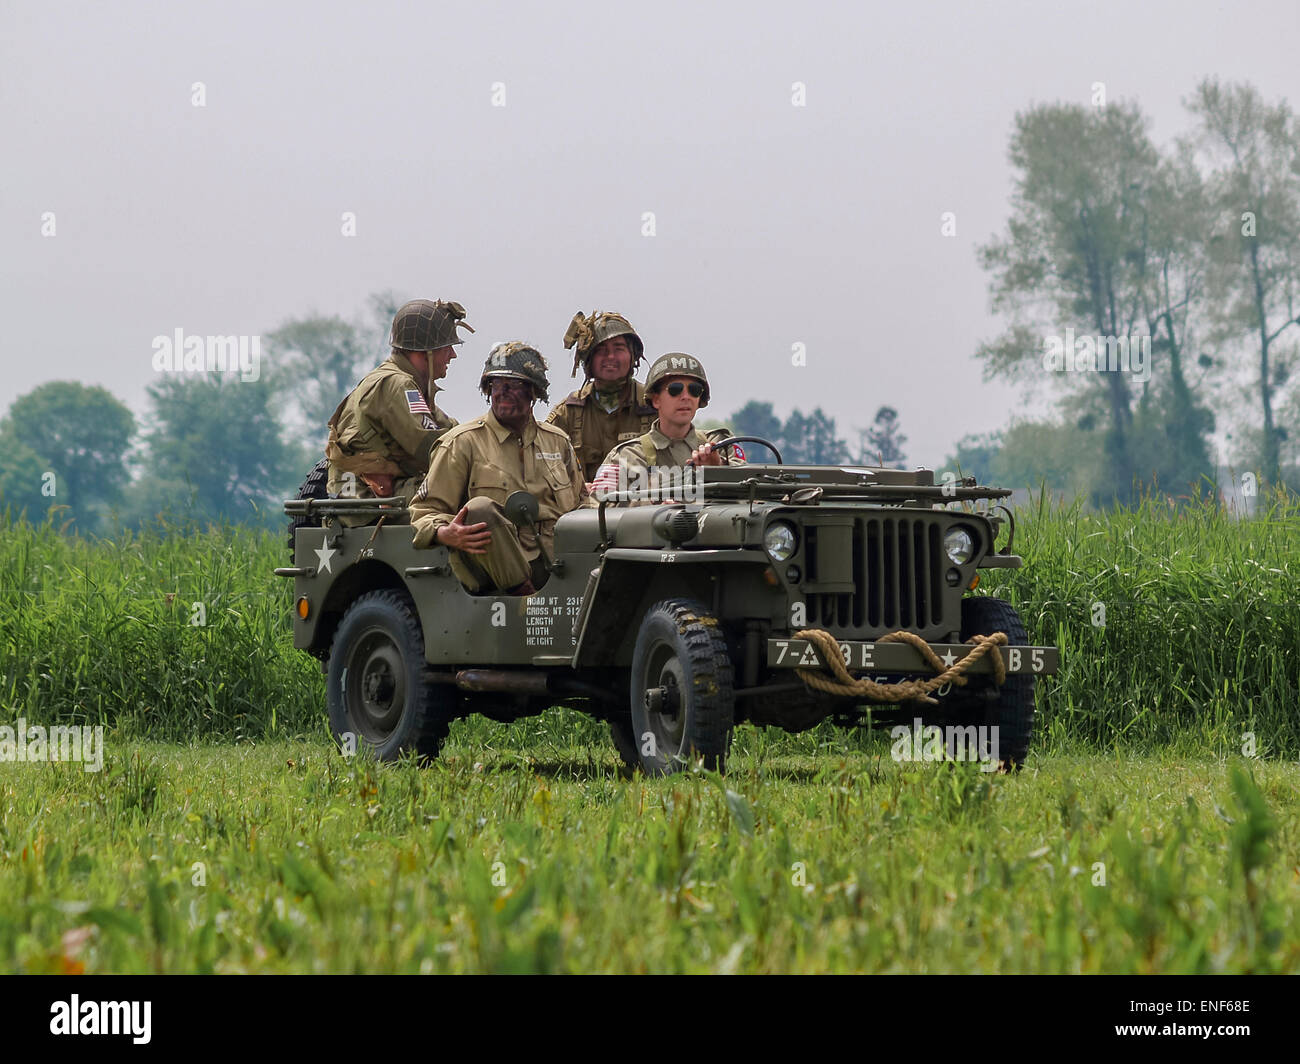 American US Allied Soldiers in WW2 Uniform seated in a Willys Jeep in a meadow as part of the D-Day Anniversary, Normandy France Stock Photo